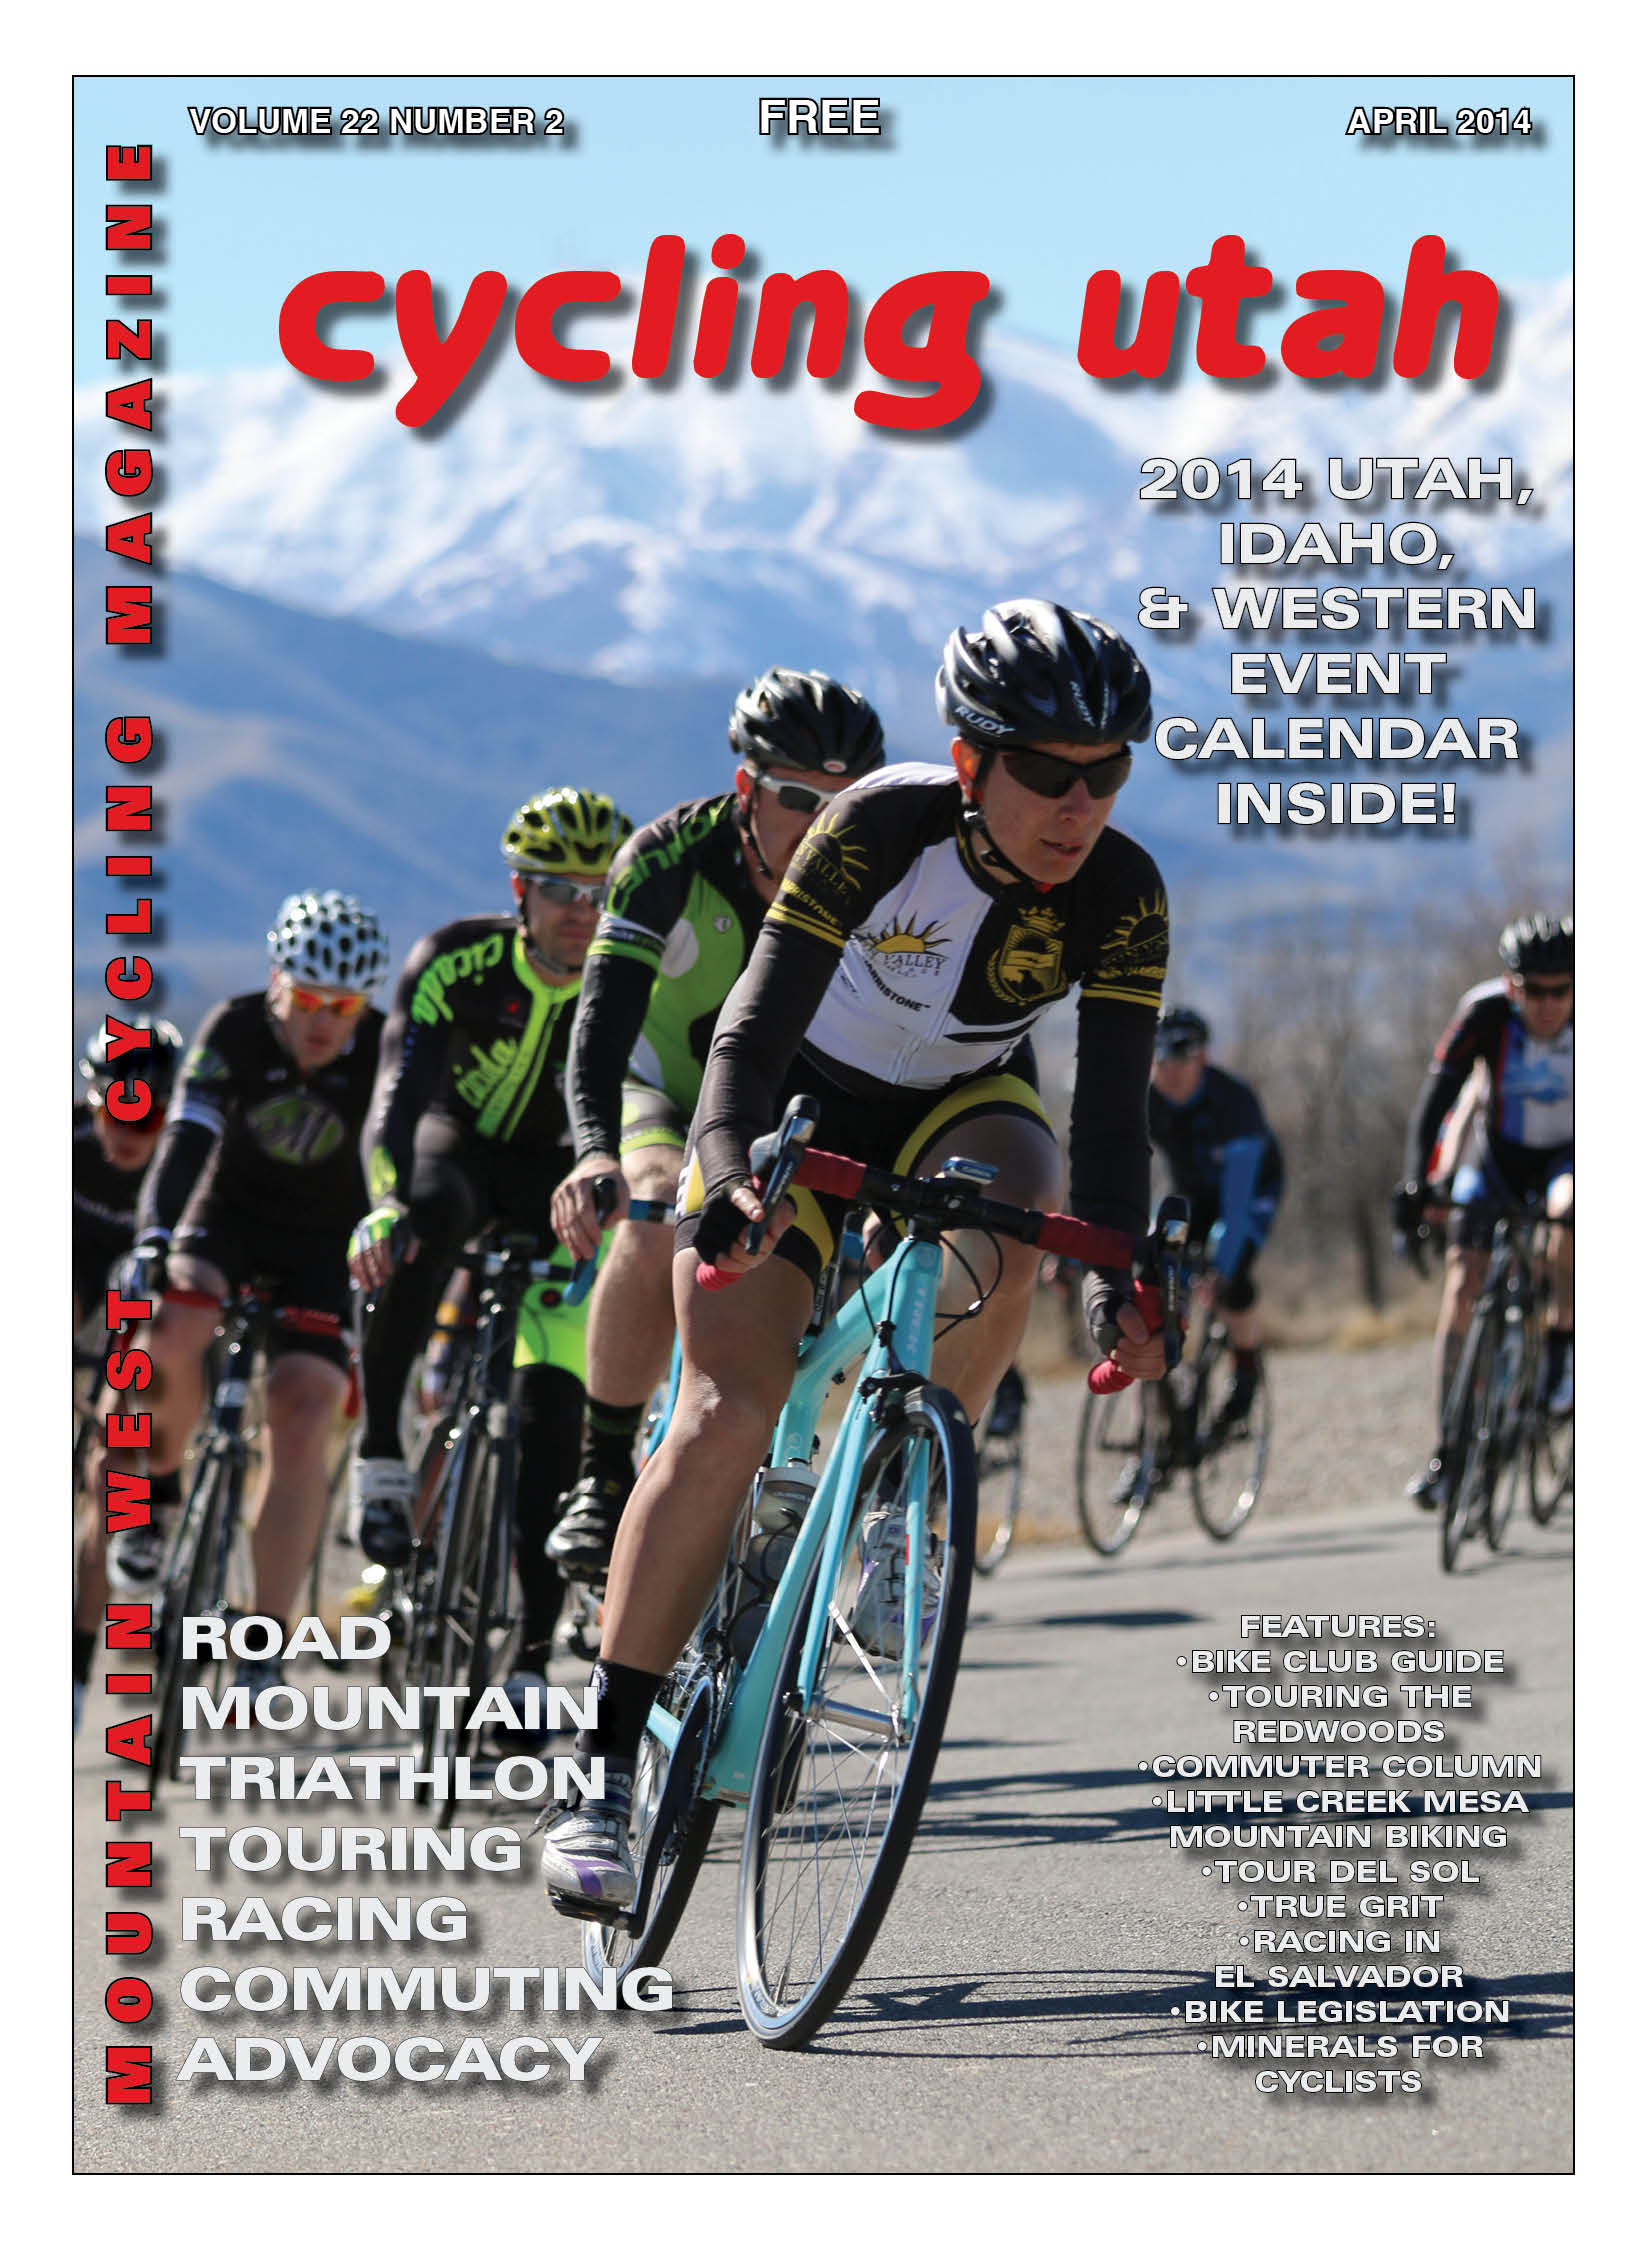 Cycling Utah’s April 2014 Issue is Now Available!